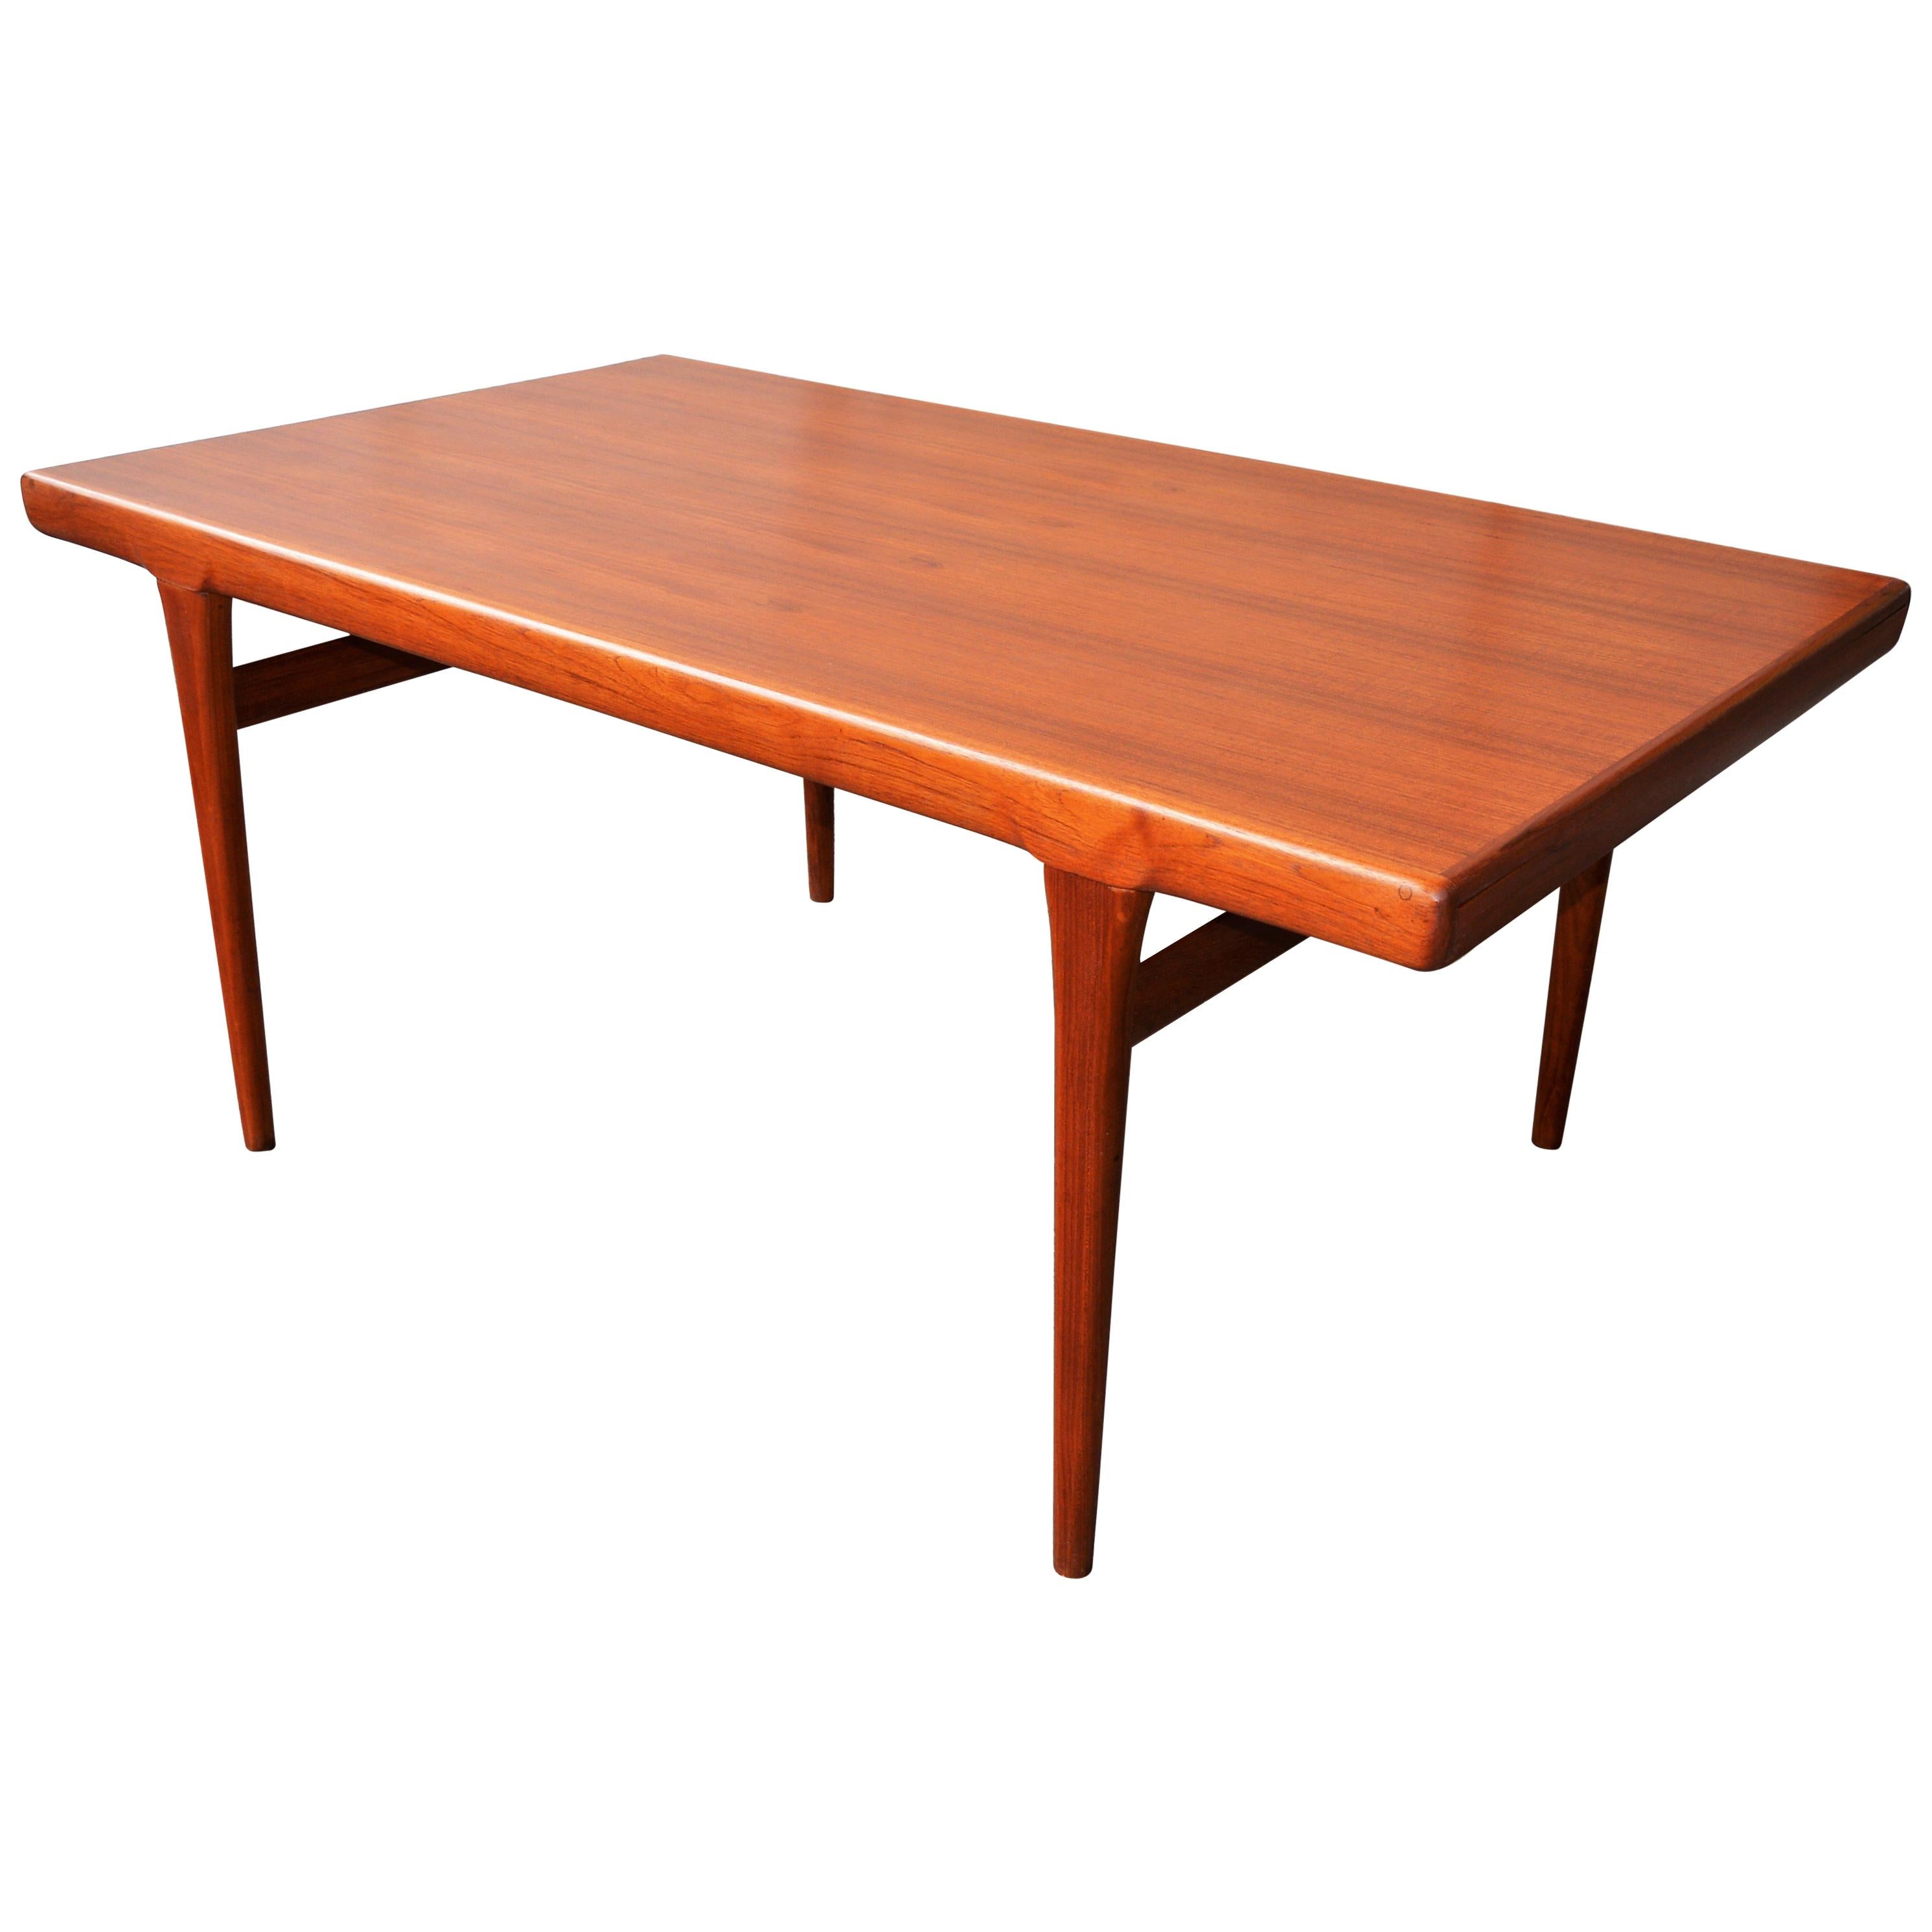 Danish Teak Two-Leaf Dining Table by Kofod Larsen with His Iconic Leg Detail